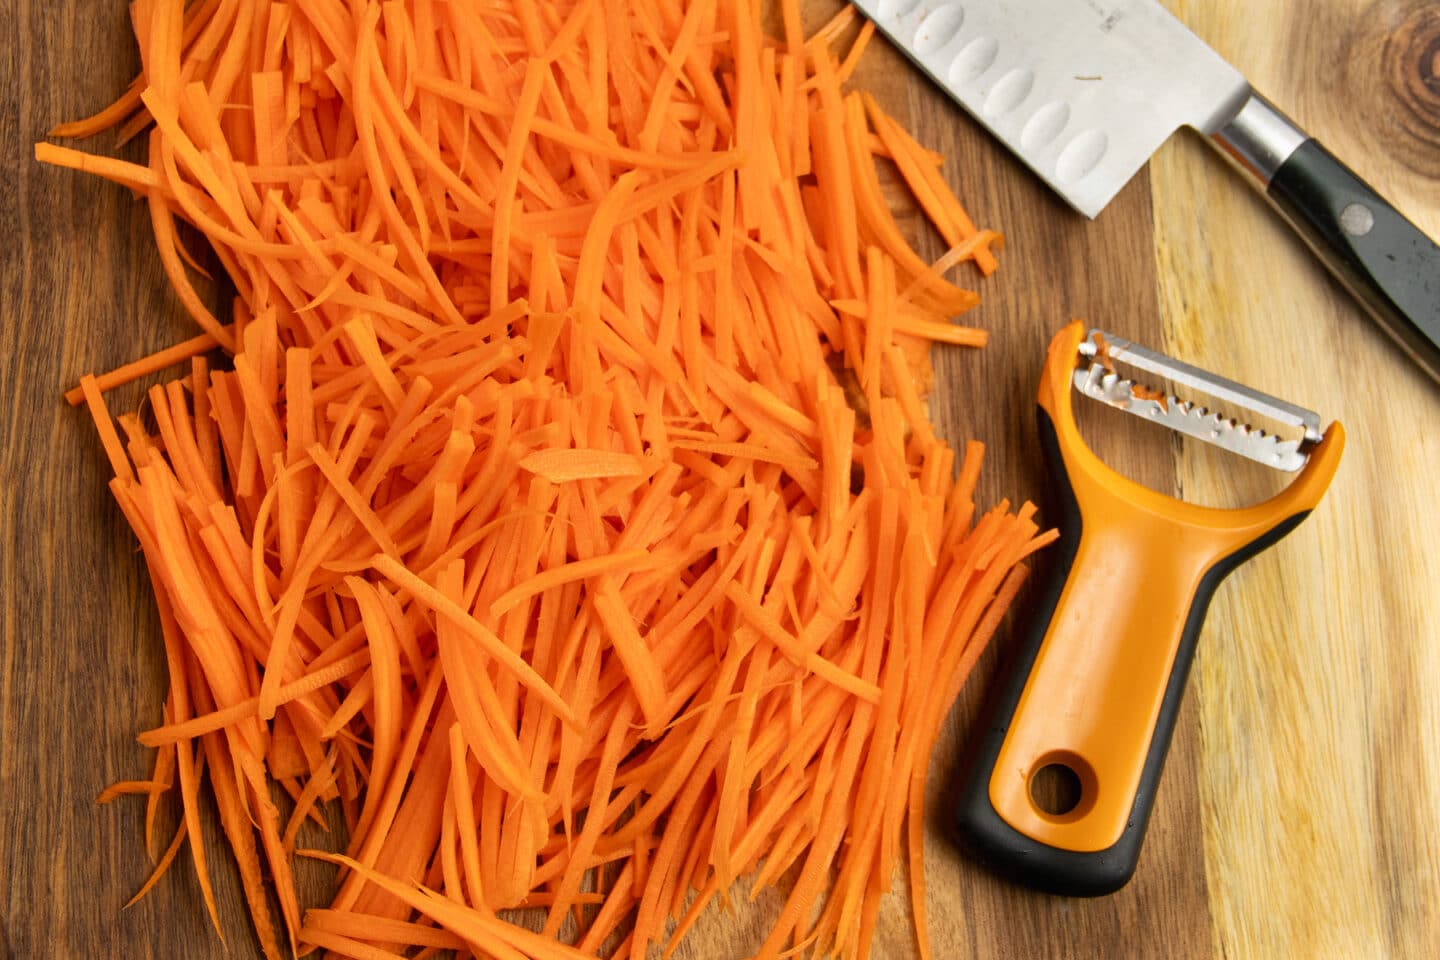 This is a picture of carrots being cut into matchsticks.